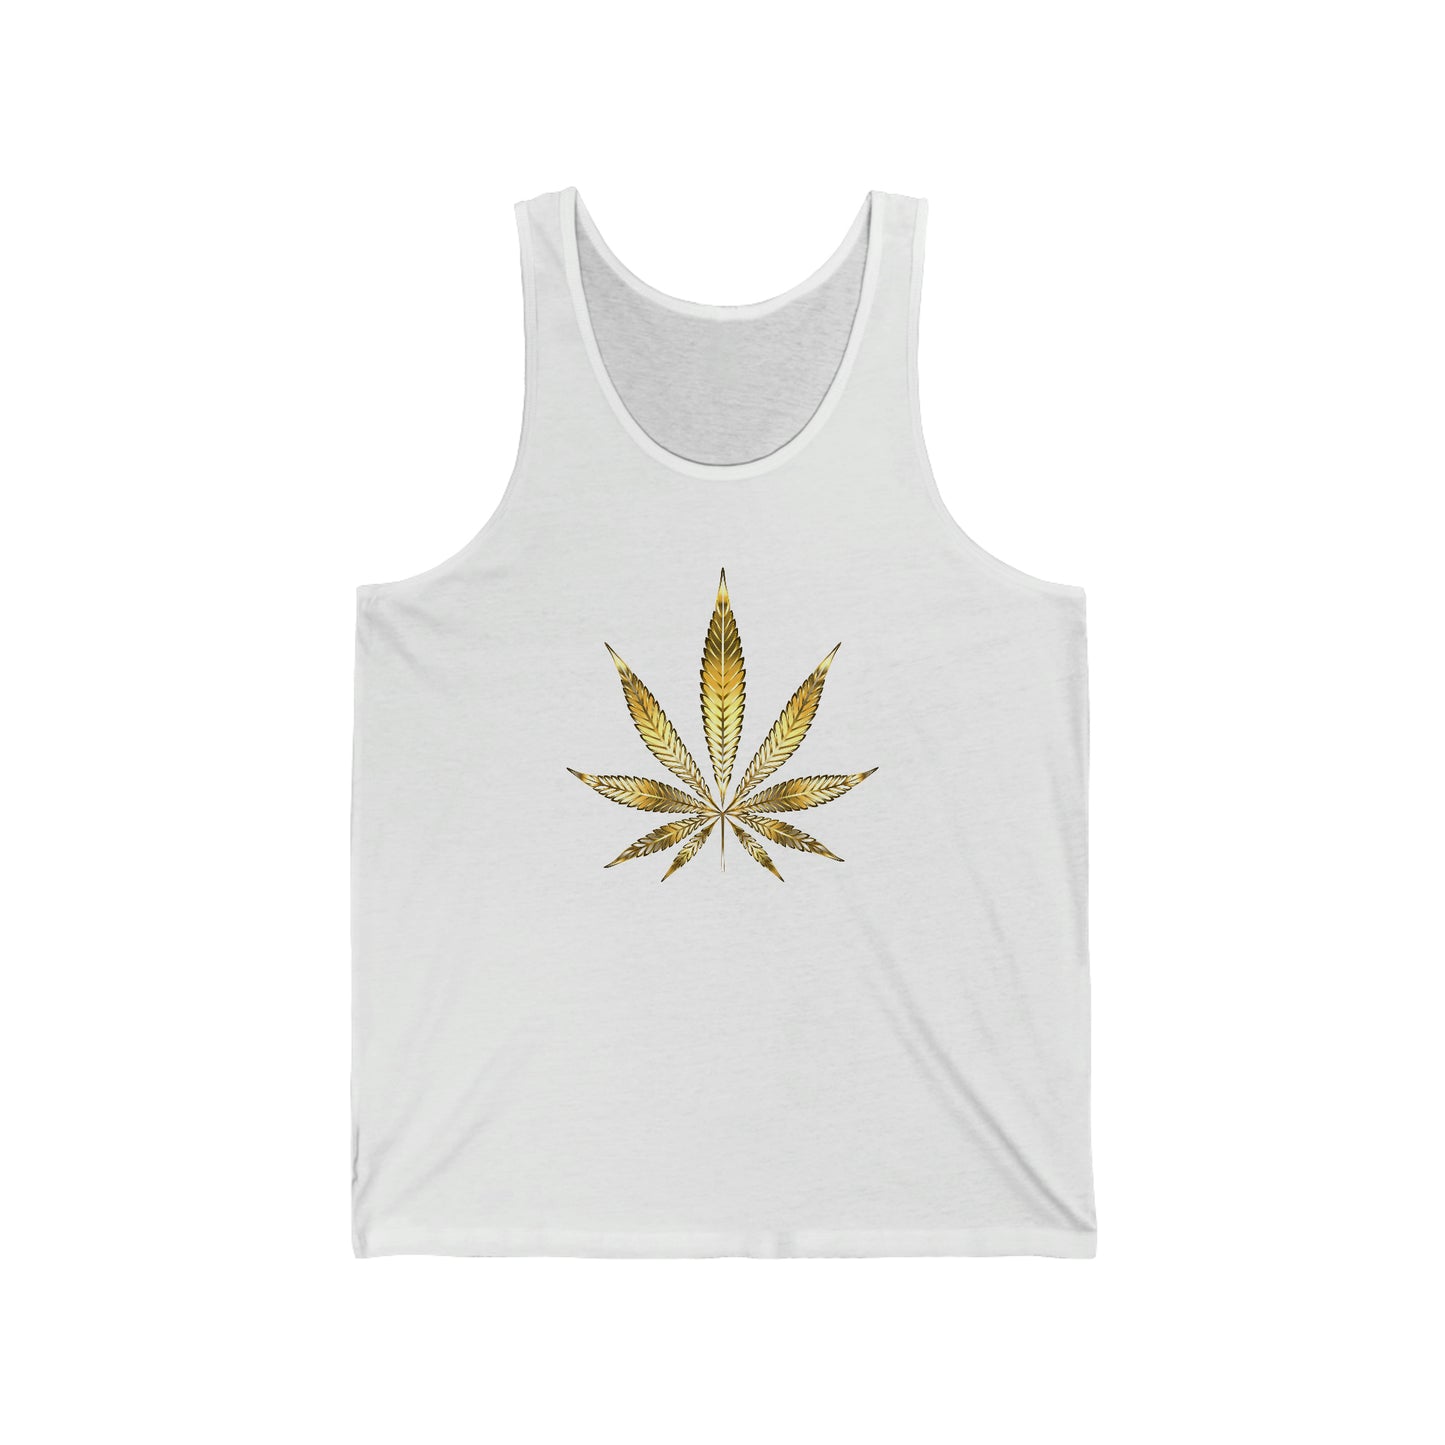 A white weed tank top jersey with a bright gold weed leaf in the center